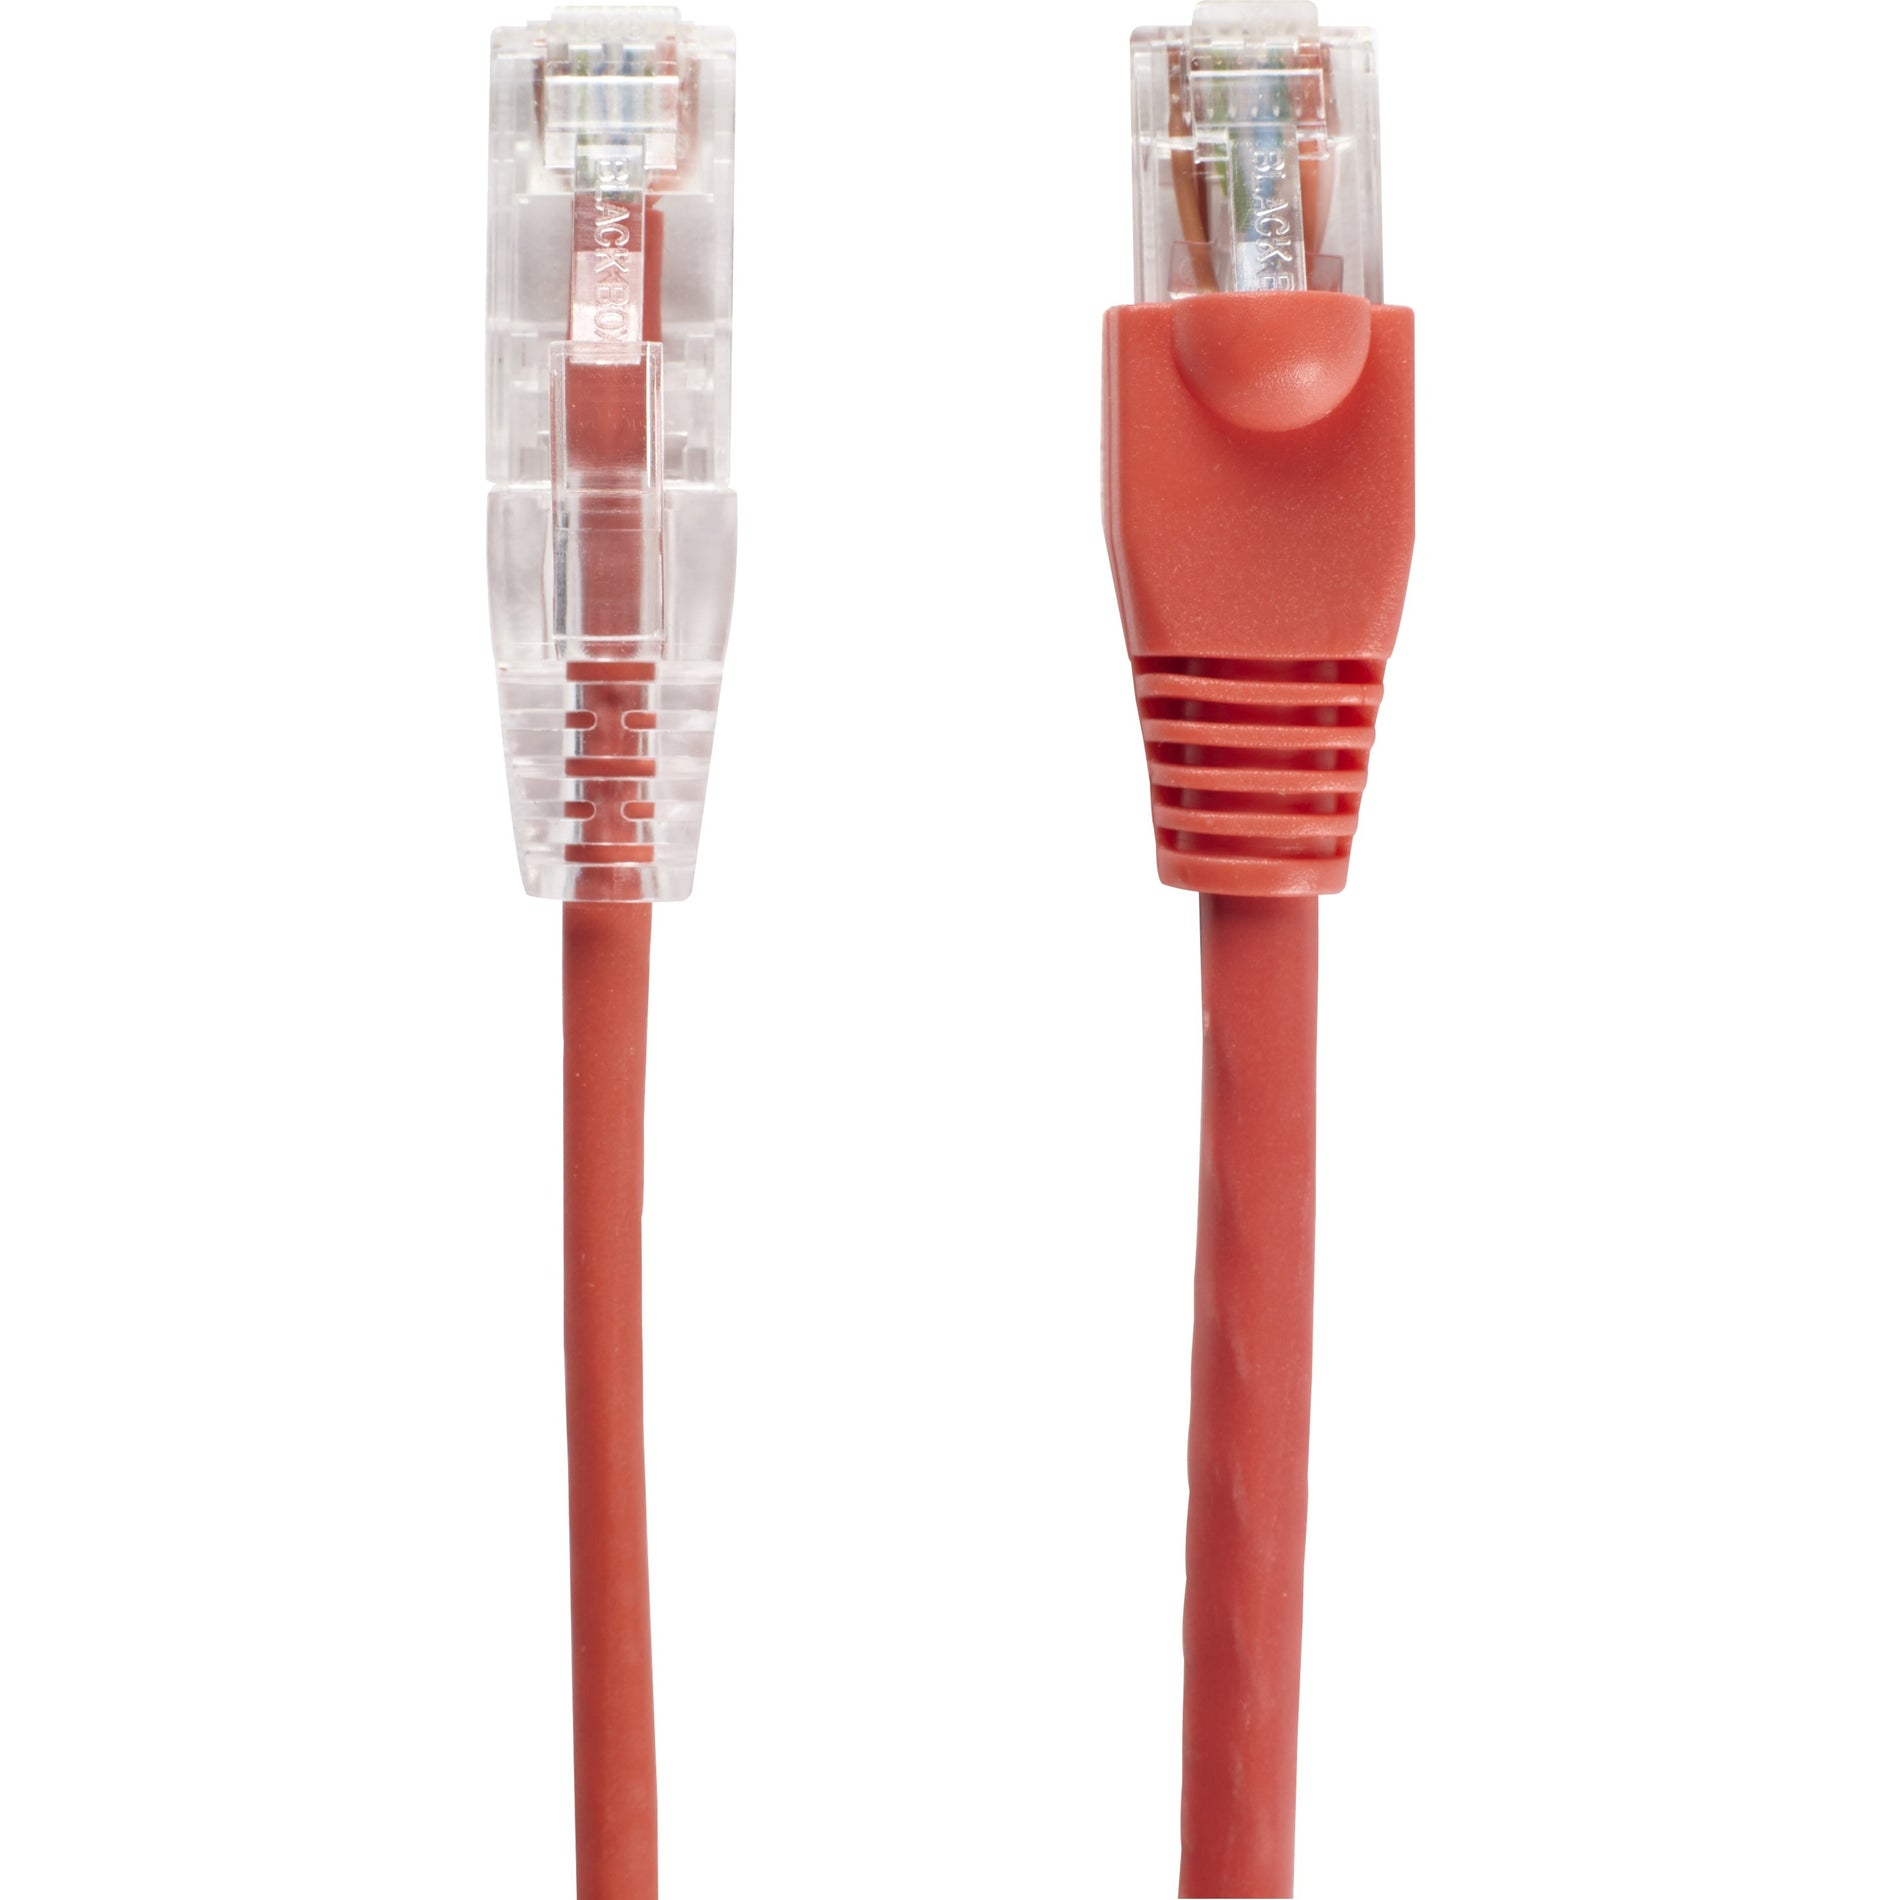 Black Box C6APC28-RD-07 Slim-Net Cat.6a UTP Patch Network Cable, 7 ft, Red